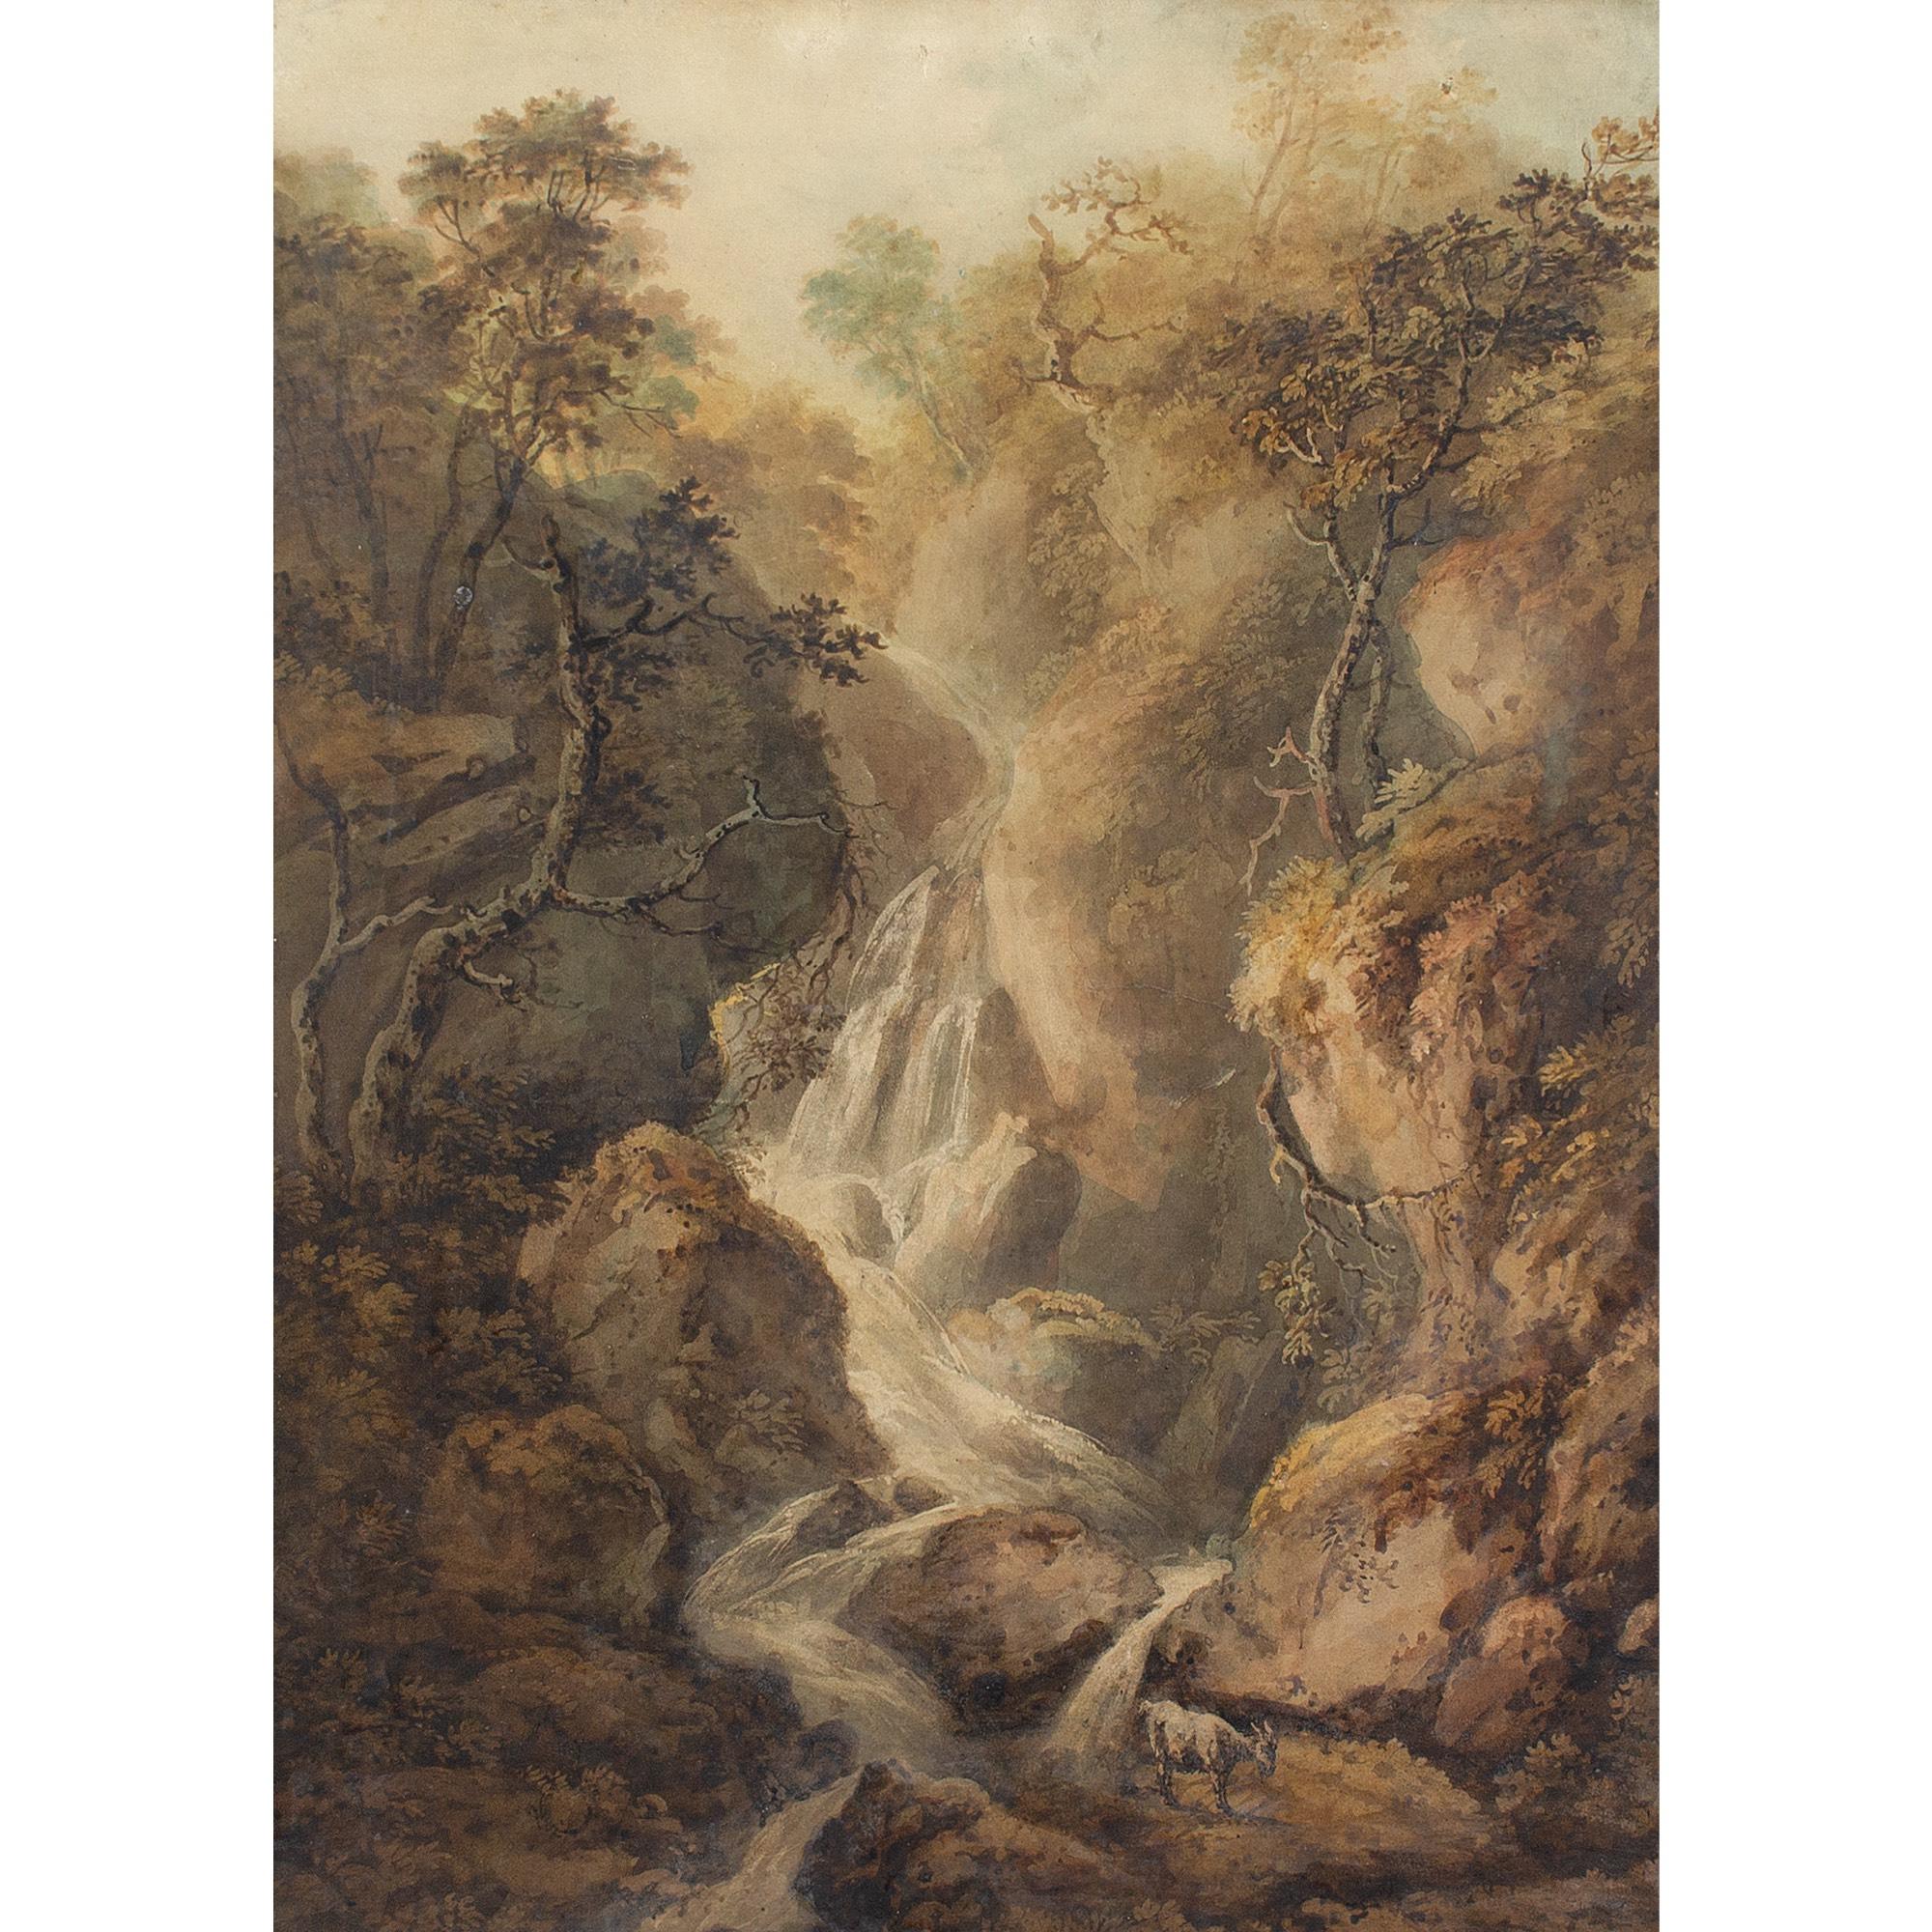 Benjamin Barker of Bath (Attributed), A Goat By A Waterfall 1